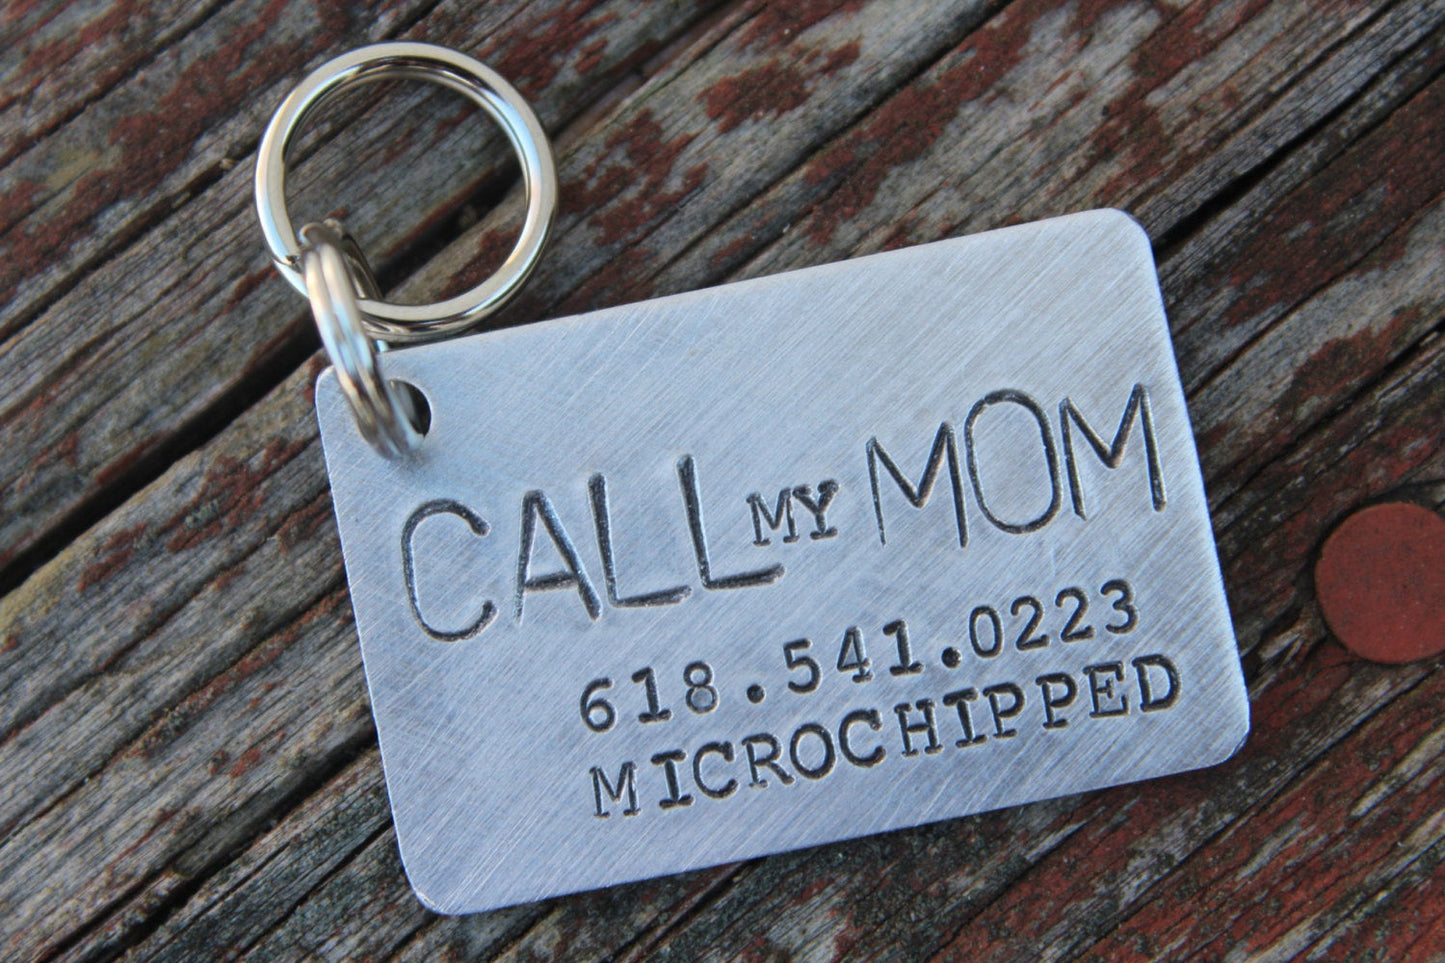 Custom Hand Stamped Dog ID Tag, Call My Mom, Personalized Dog Tag, Tag for Large Dog, Copper Dog Tag, Aluminum Pet ID Tag